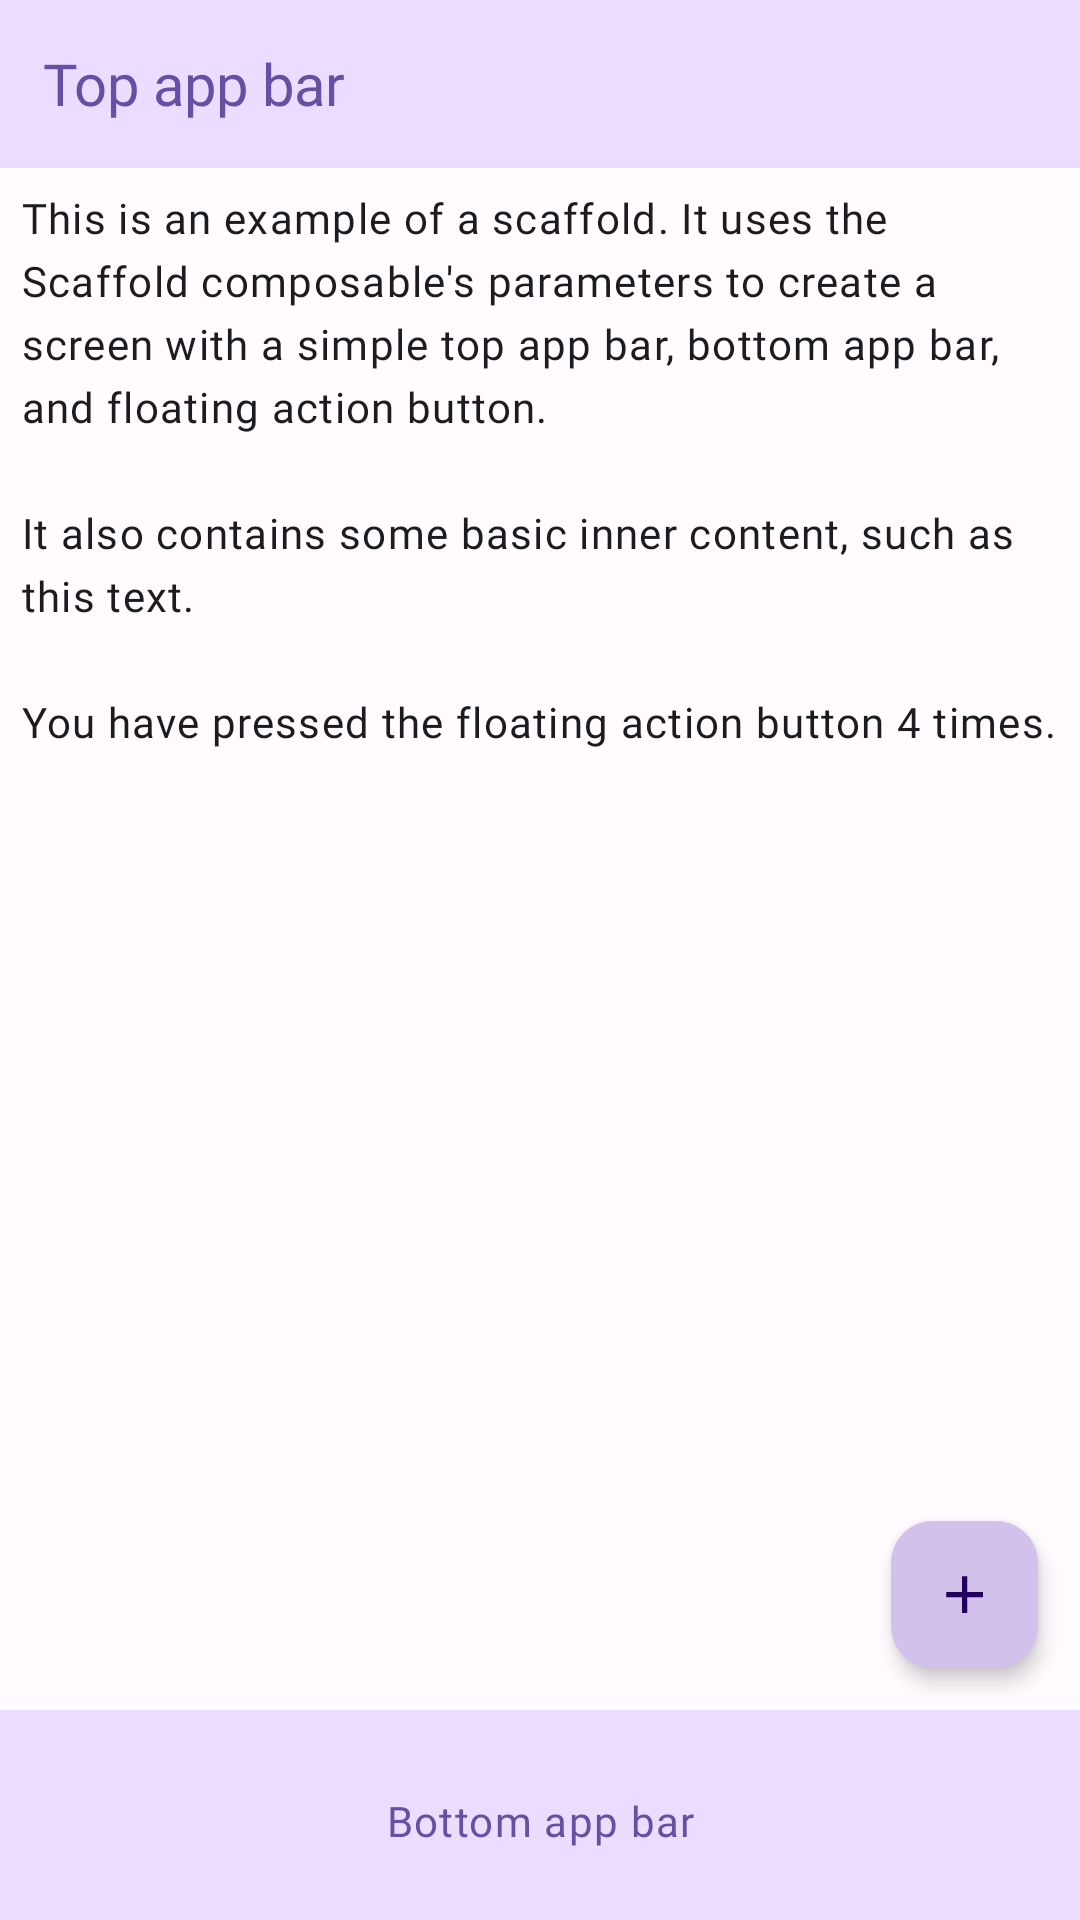 An implementation of scaffold that contains simple top and bottom app bars, as well as a floating action button that iterates a counter. The inner content of the scaffold is simple text that explains the component.